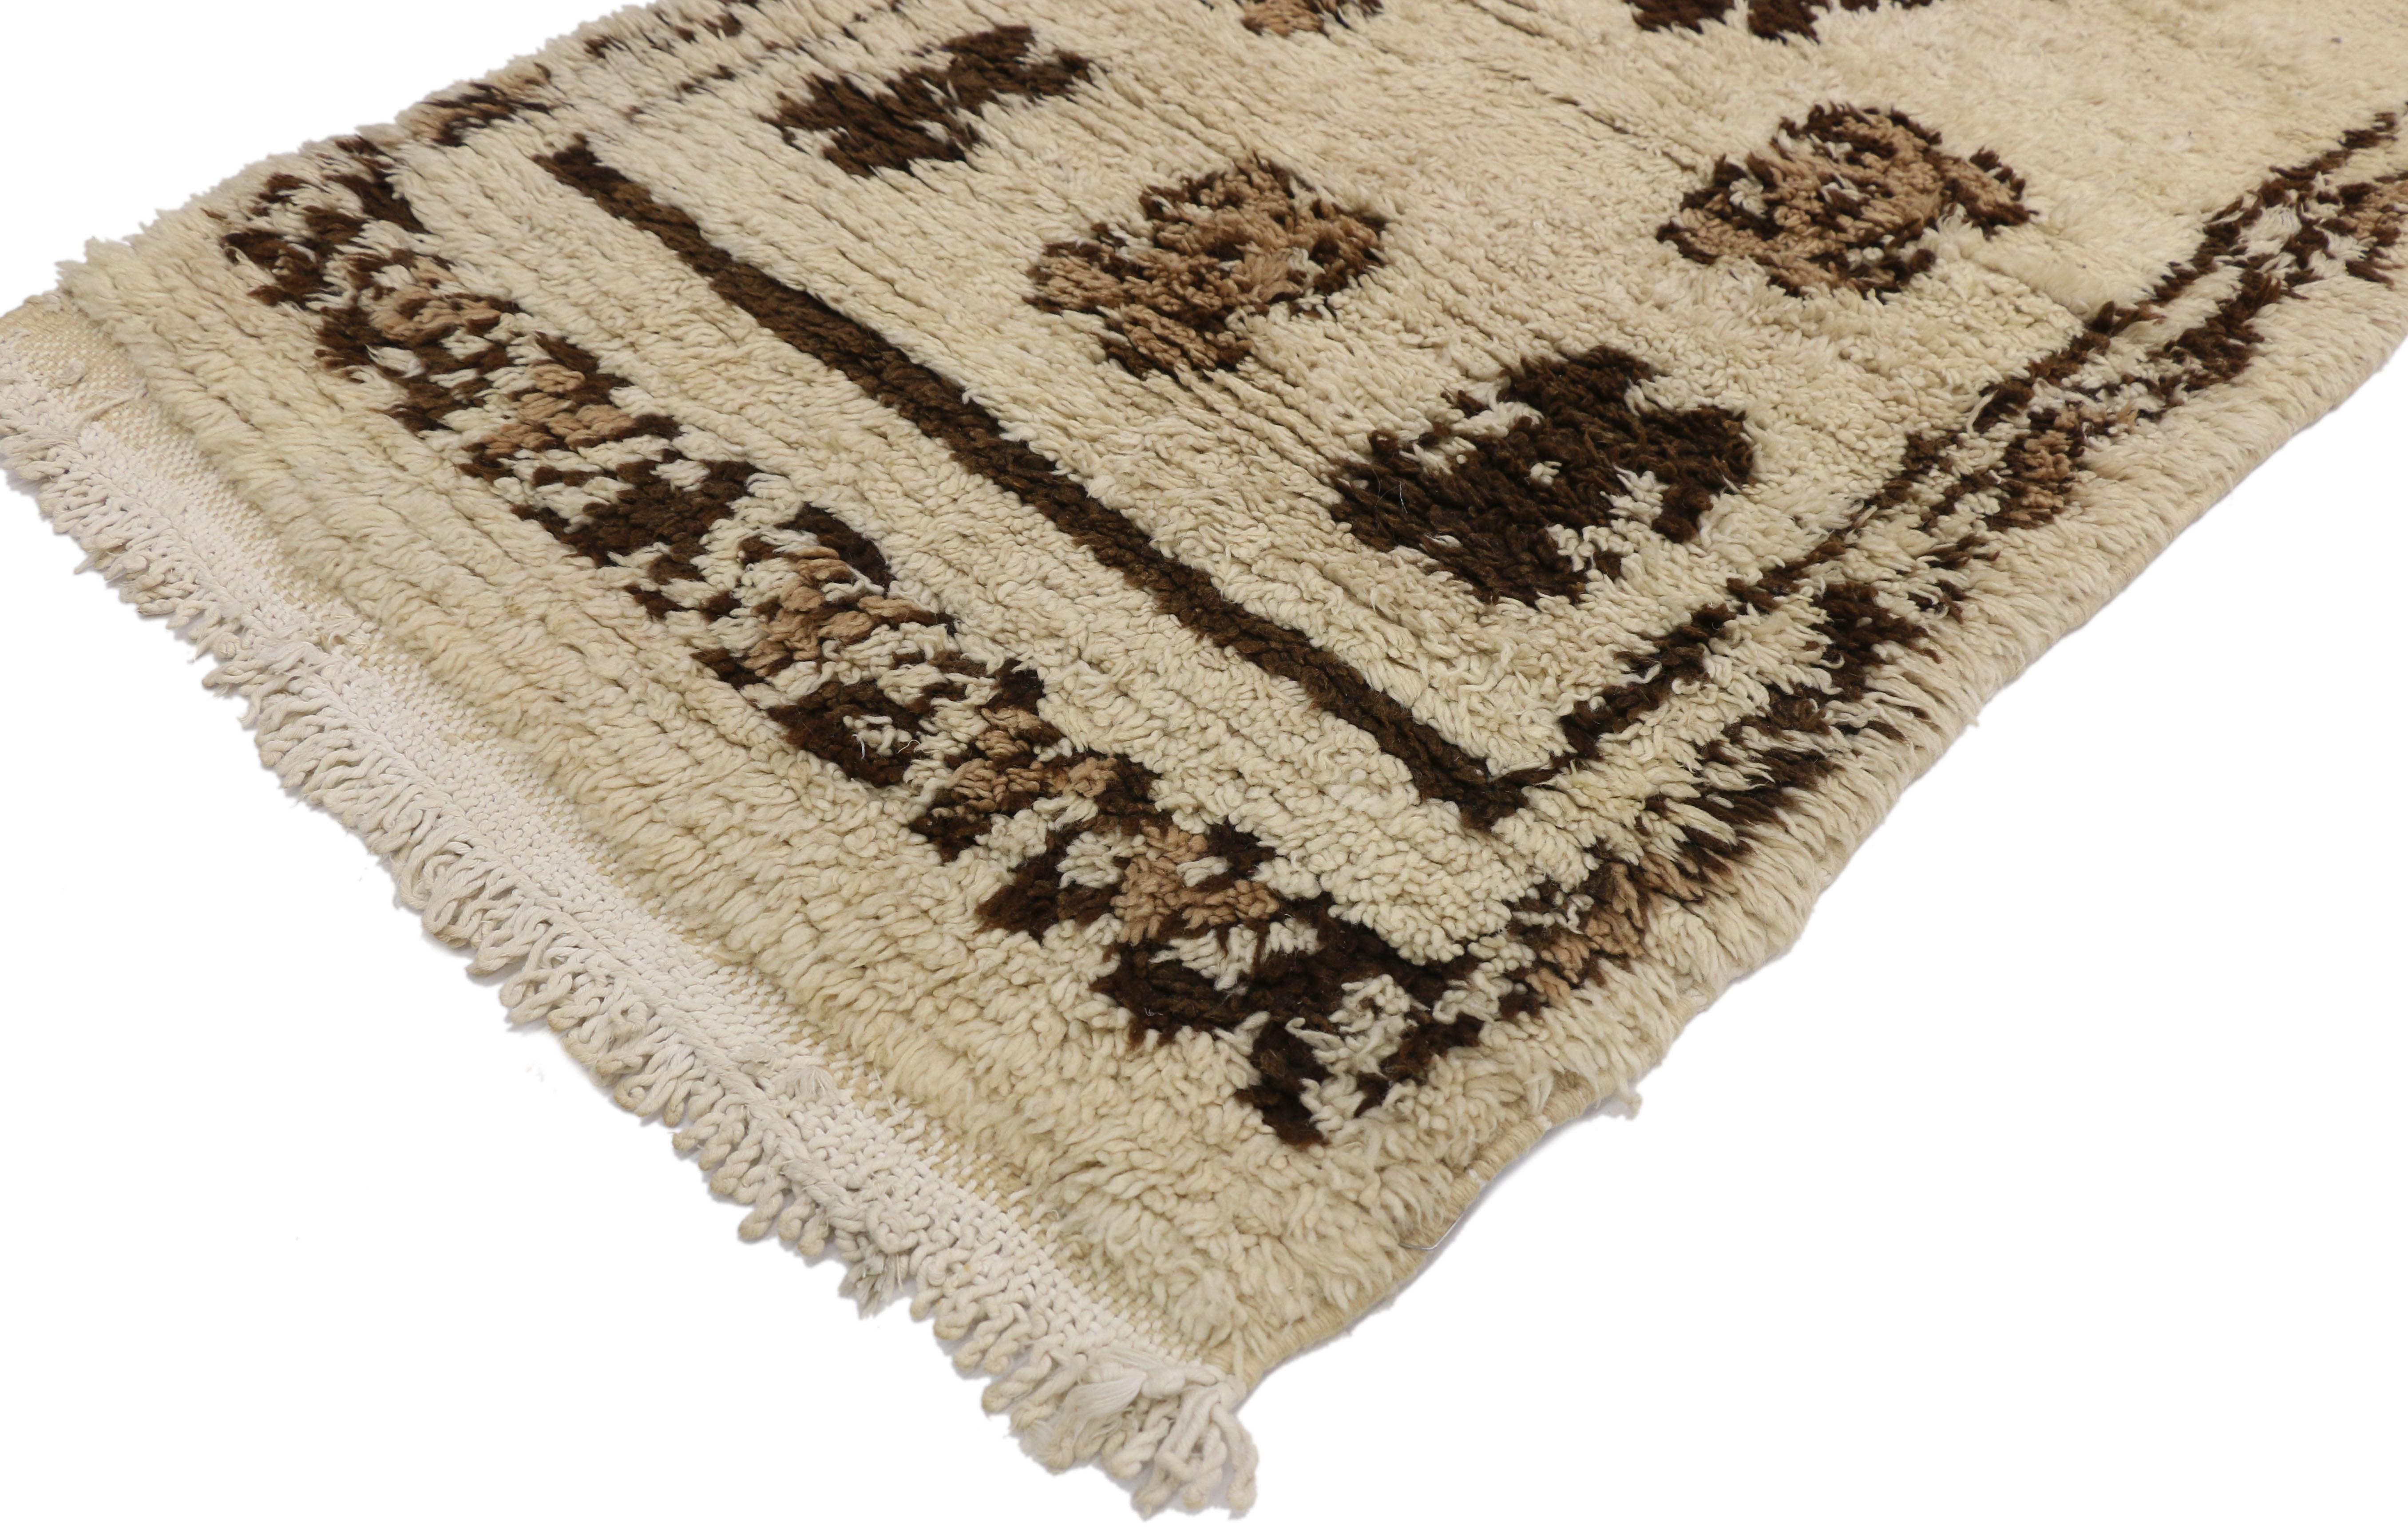 20866 Vintage Berber Moroccan Rug with Tribal Style 02'08 x 06'09. This hand knotted wool vintage Berber Moroccan accent rug features an all-over pattern of Elibelinde motifs. Derived from the virility of the Ram's Horn motif, the Classic Elibelinde